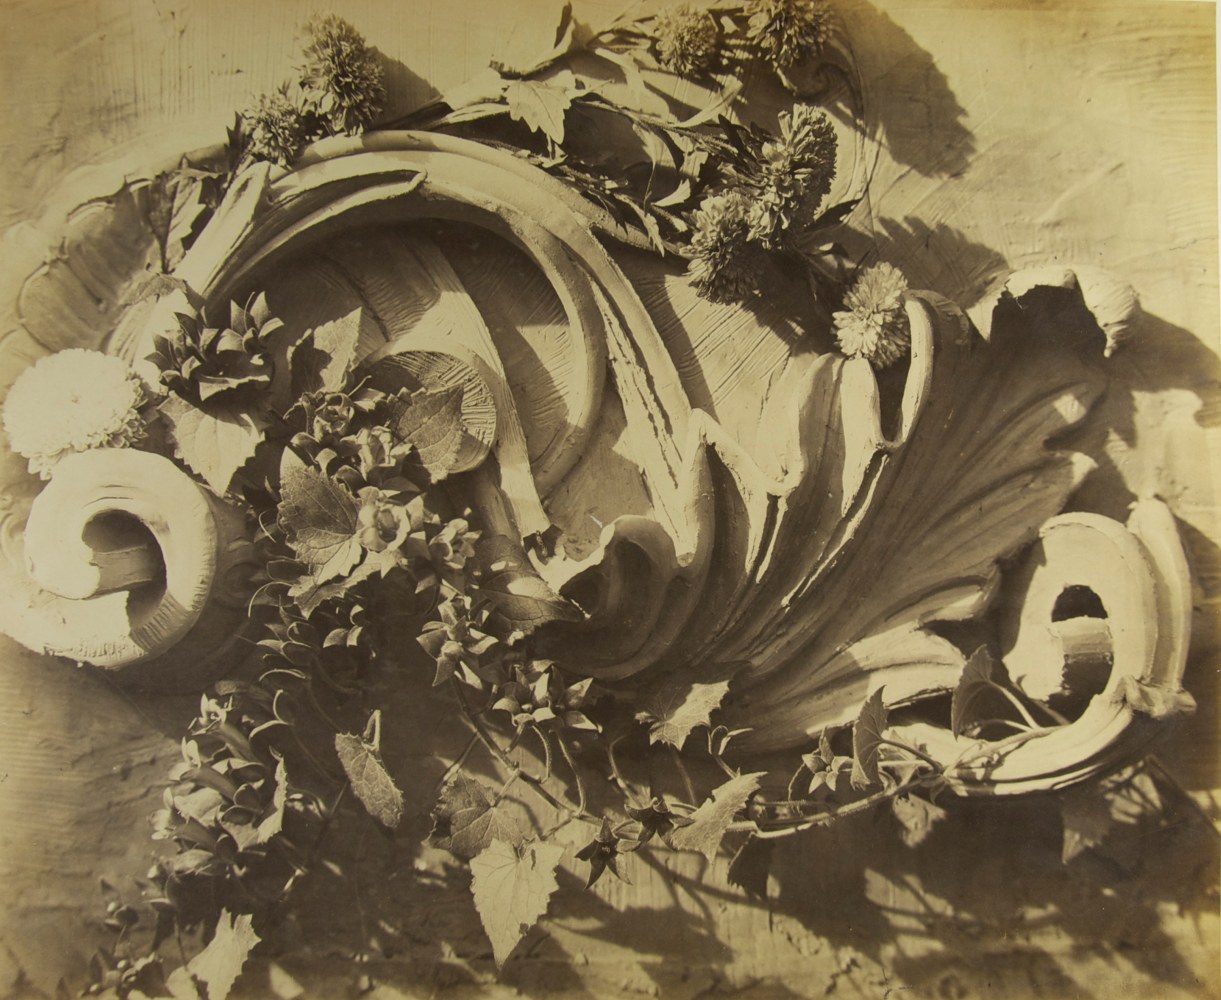 Charles Hippolyte AUBRY (French, 1811-1877) Decorative motifs, circa 1865 Albumen print from a collodion negative 37.4 x 46.2 cm mounted on 47.0 x 55.0 cm paper  Blue &quot;ch. aubry&quot; signature stamp, blue oval &quot;PHOTOGRAPHIE, 8, RUE DE LA REINE BLANCHE&quot; with logo stamp and circular blindstamp &quot;MEDAILLE D'OR / À CH. AUBRY / 1864&quot;